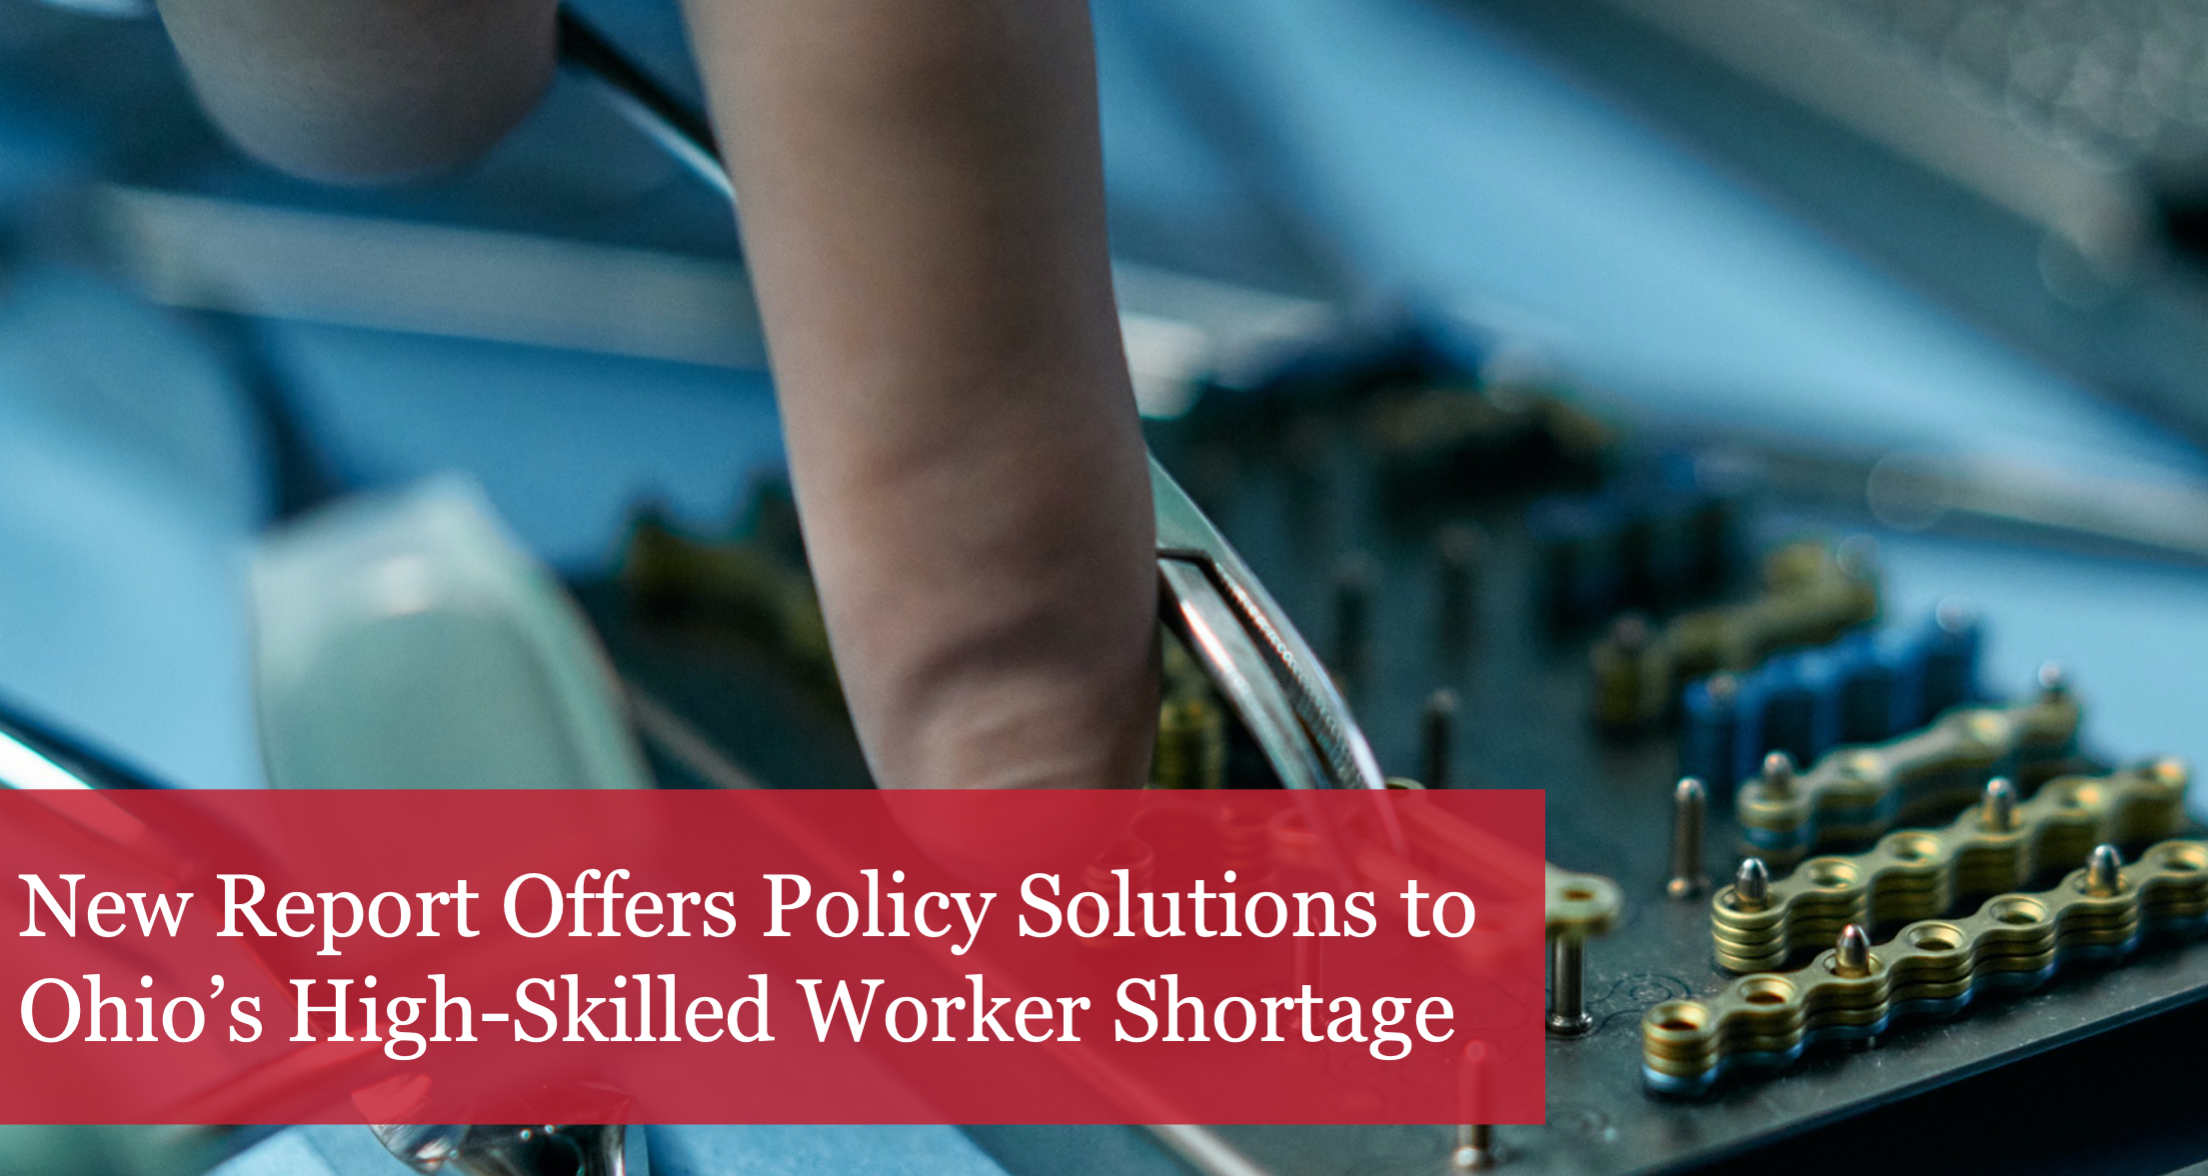 The Buckeye Institute Offers Tangible Solutions for Ohio’s High-Skilled Worker Shortage